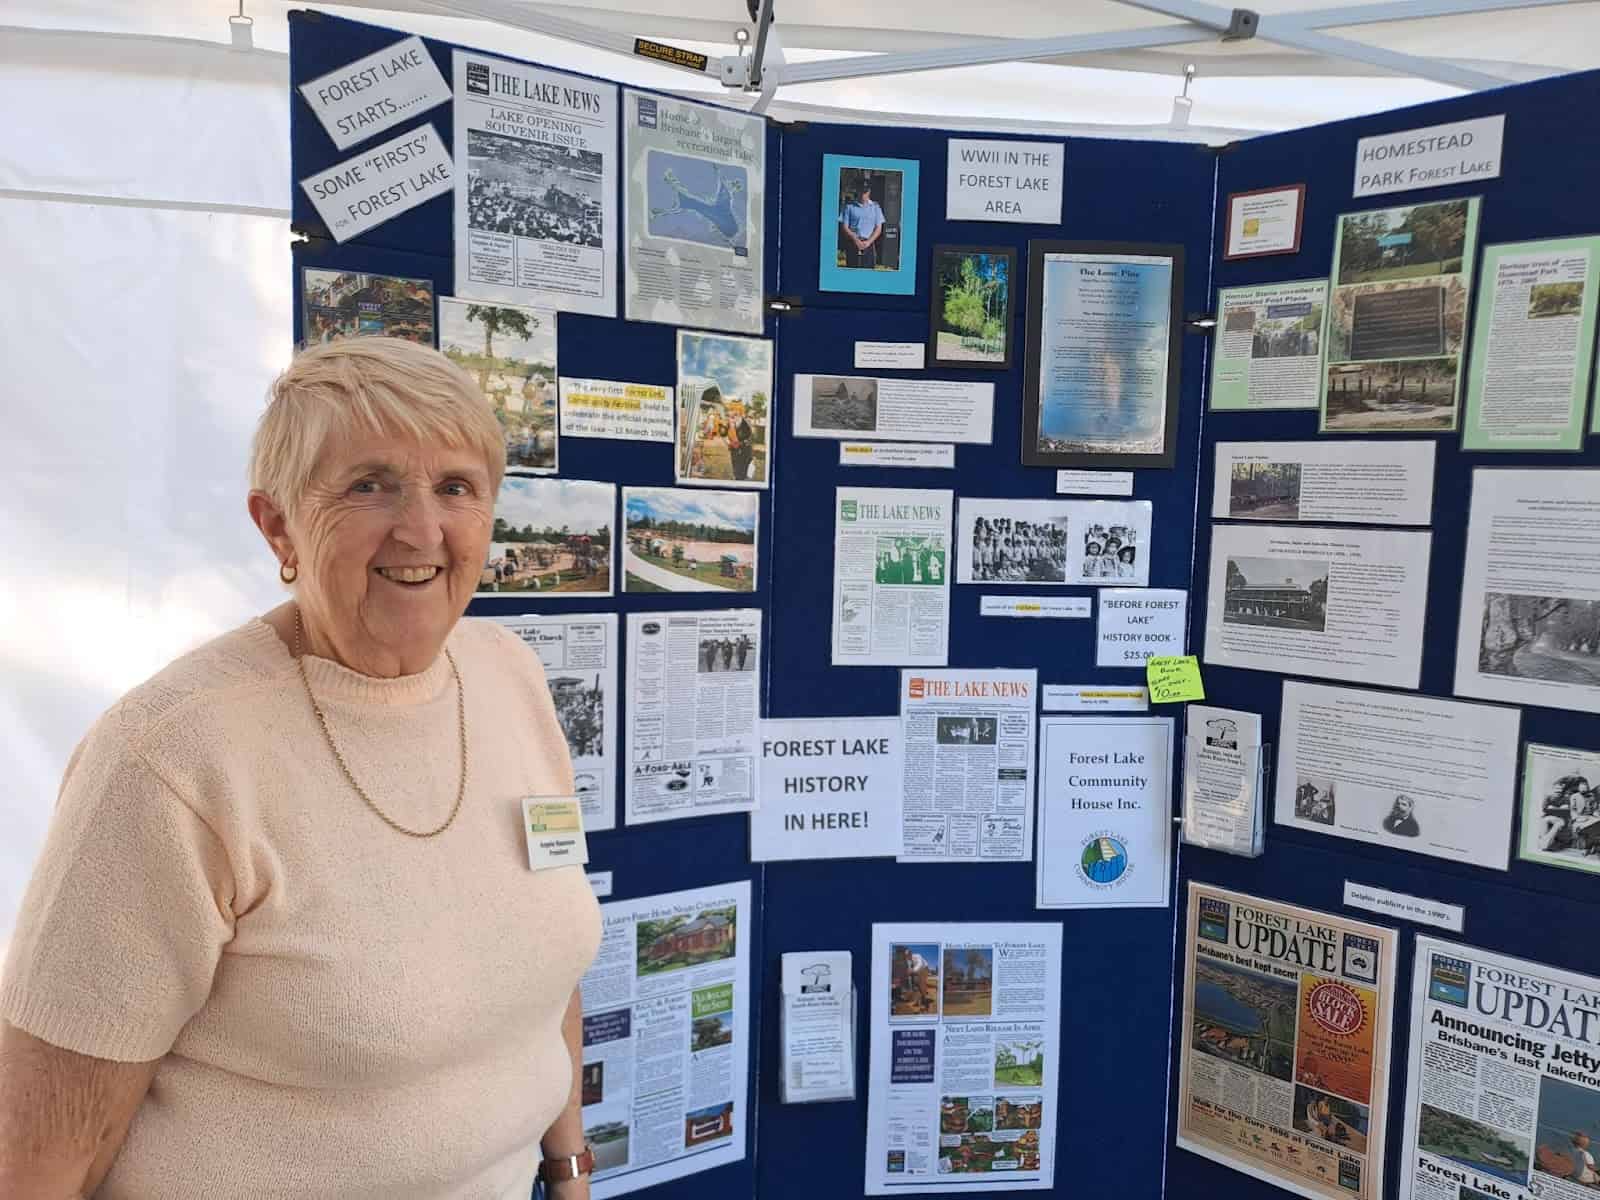 Richlands, Inala and Suburbs History Group president Angela Naumann had a great time sharing the history of the area with local residents. Photo: Corin Mackay, The Lake News.